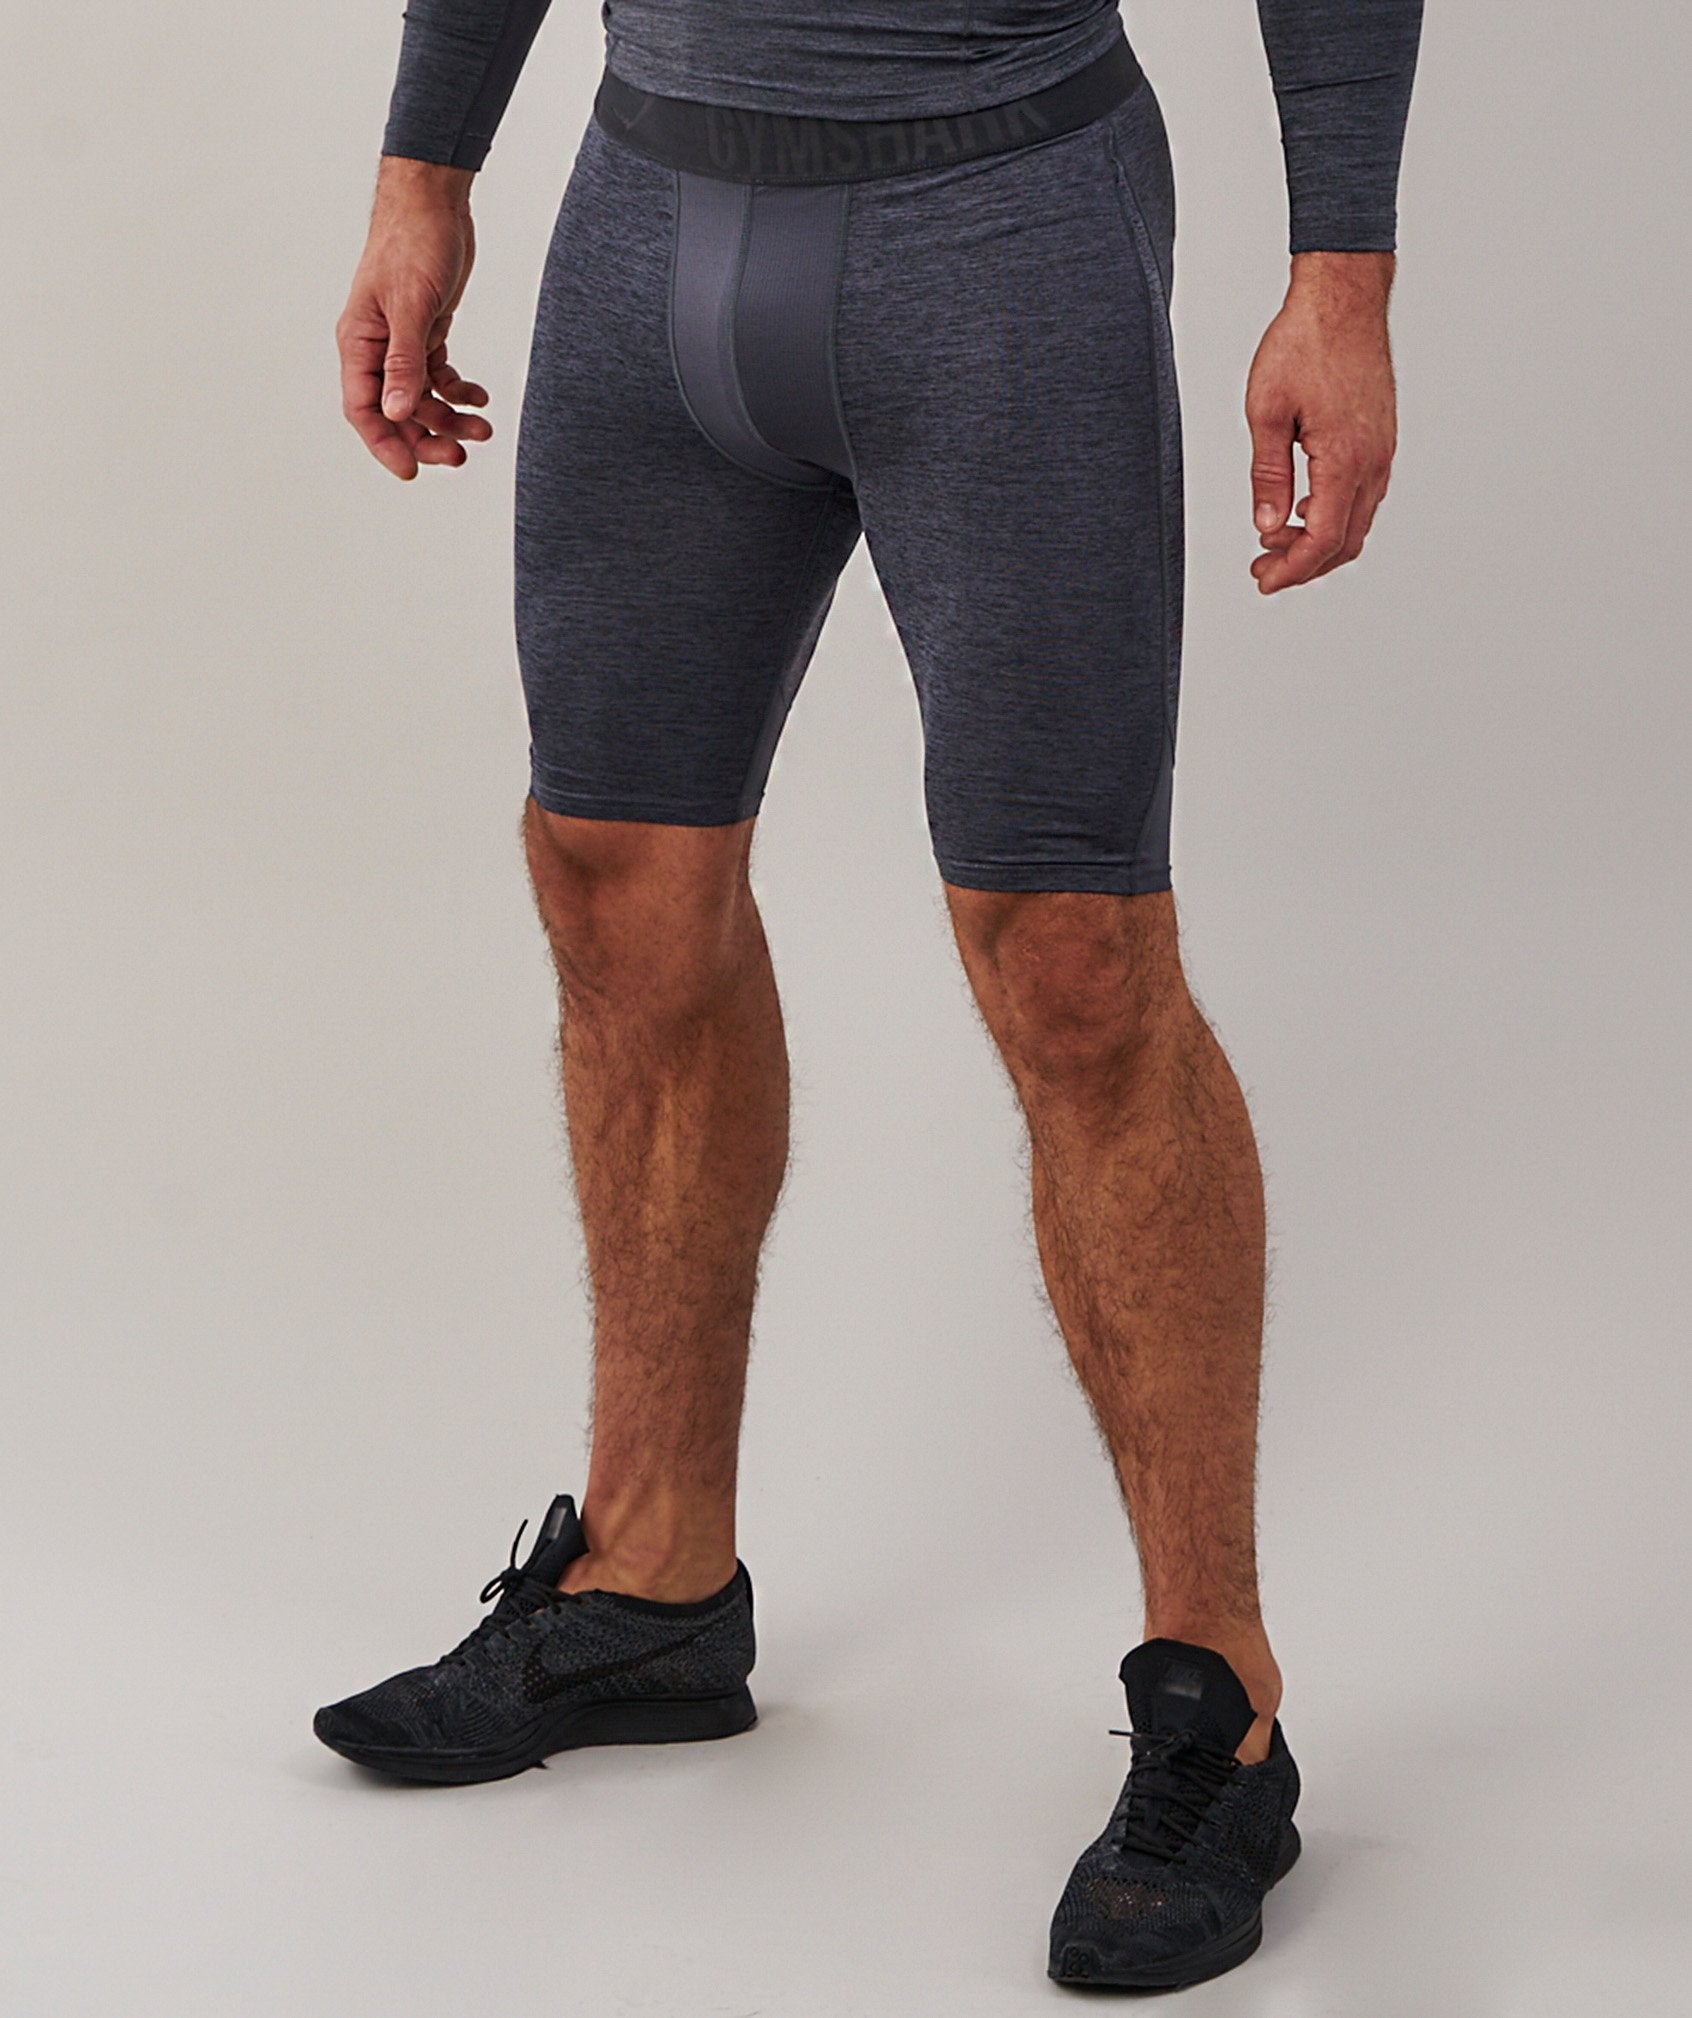 Element Baselayer Shorts in Charcoal Marl - view 6